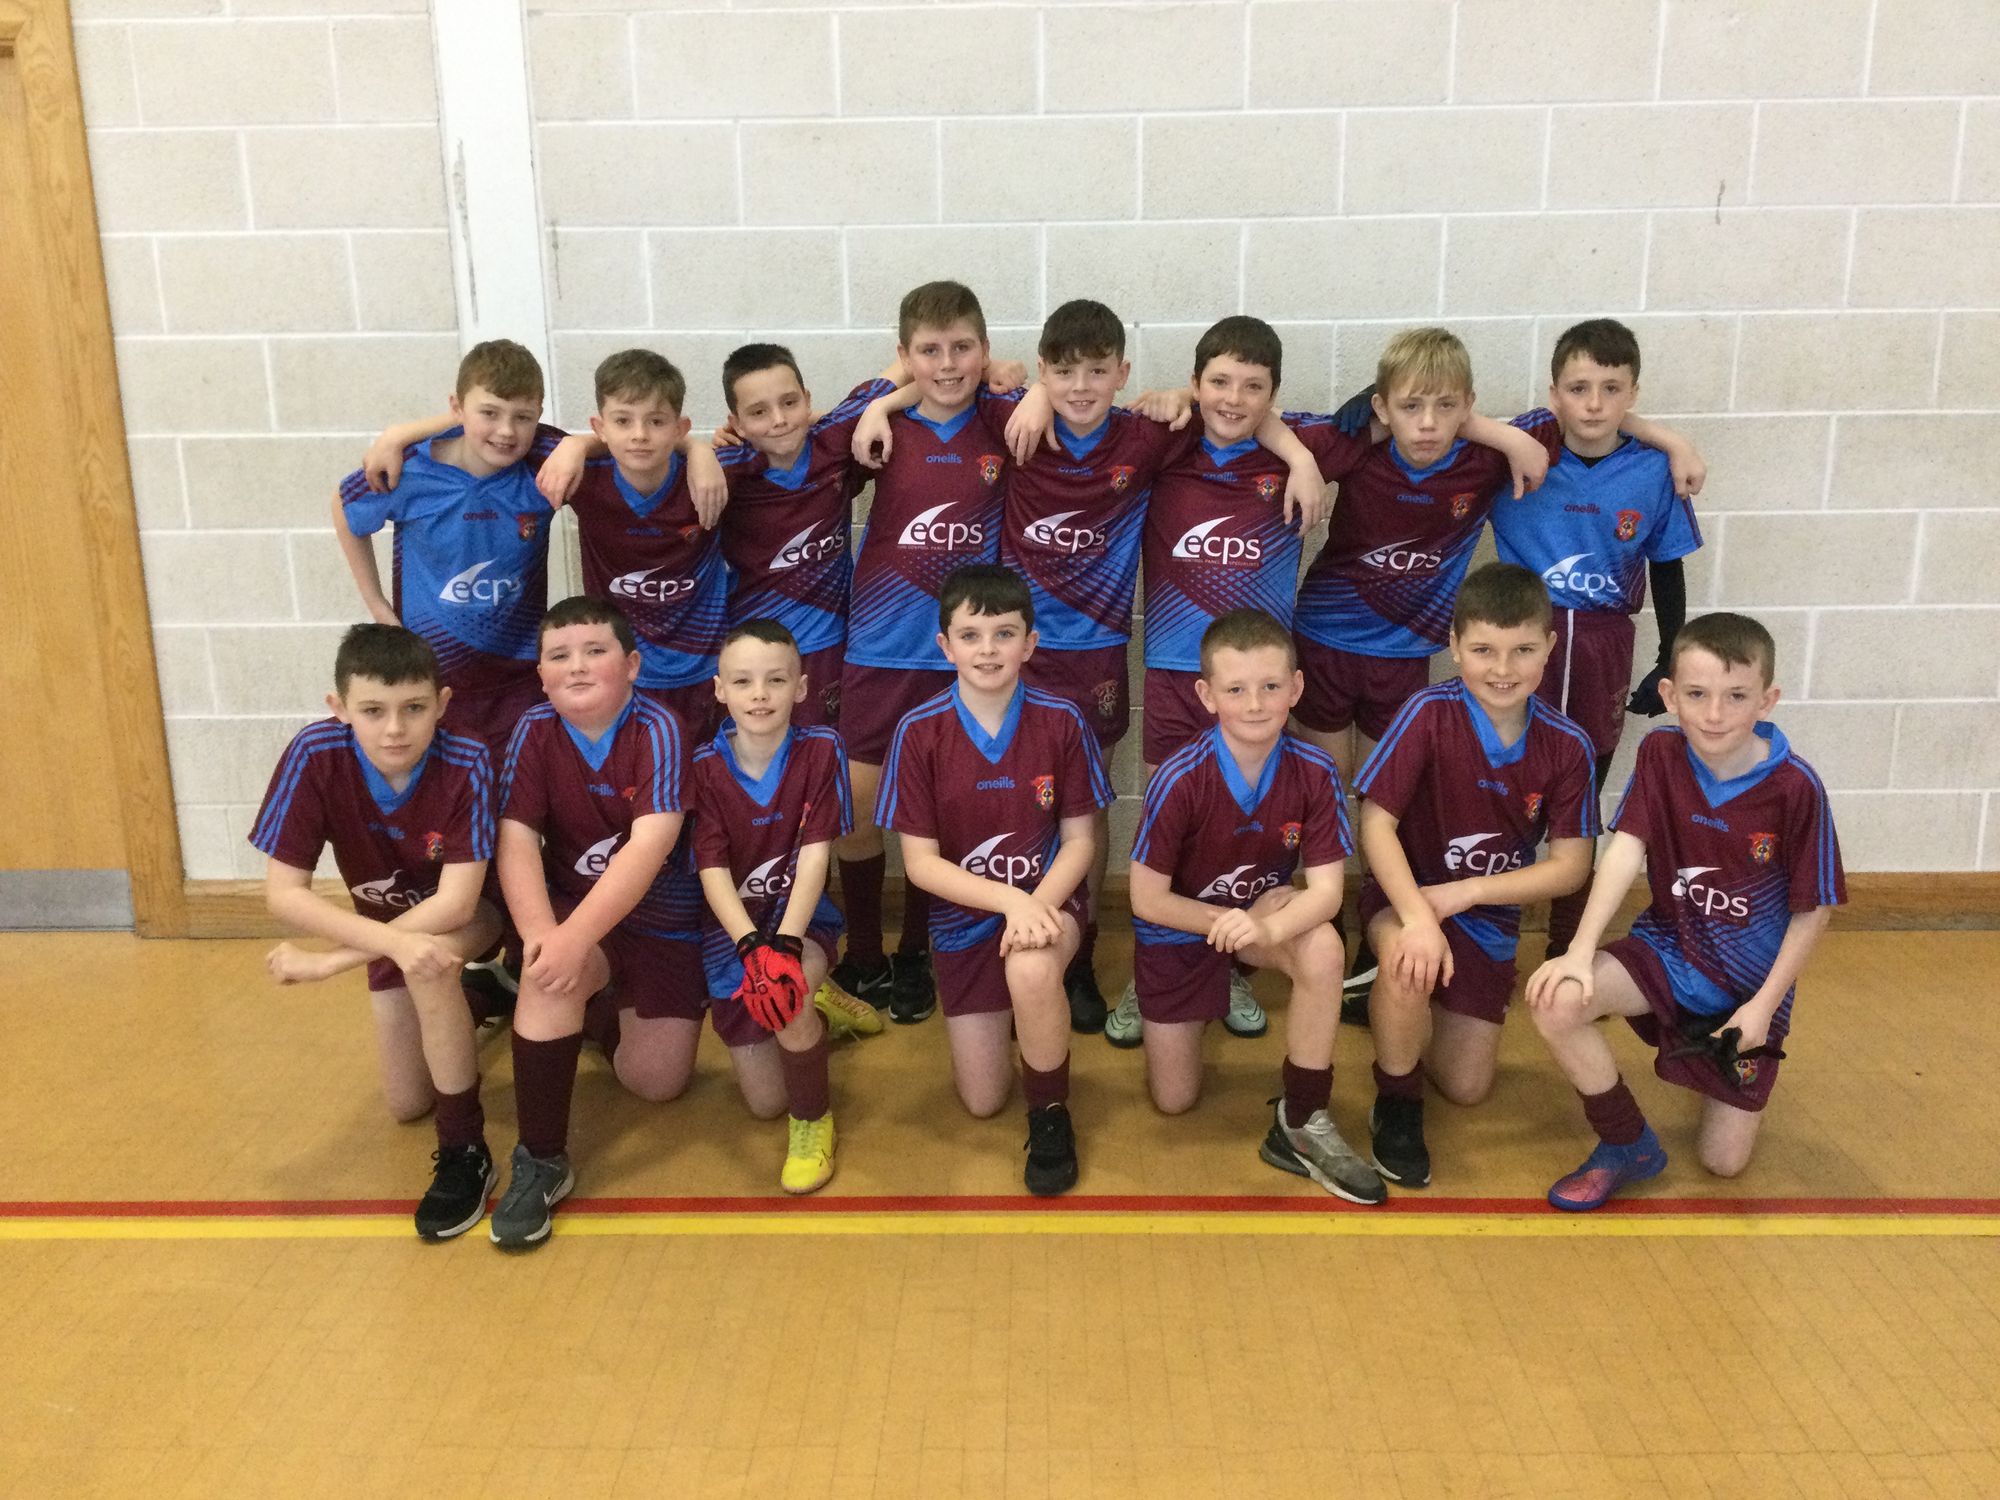 Well done to our Boys’ Gaelic Team